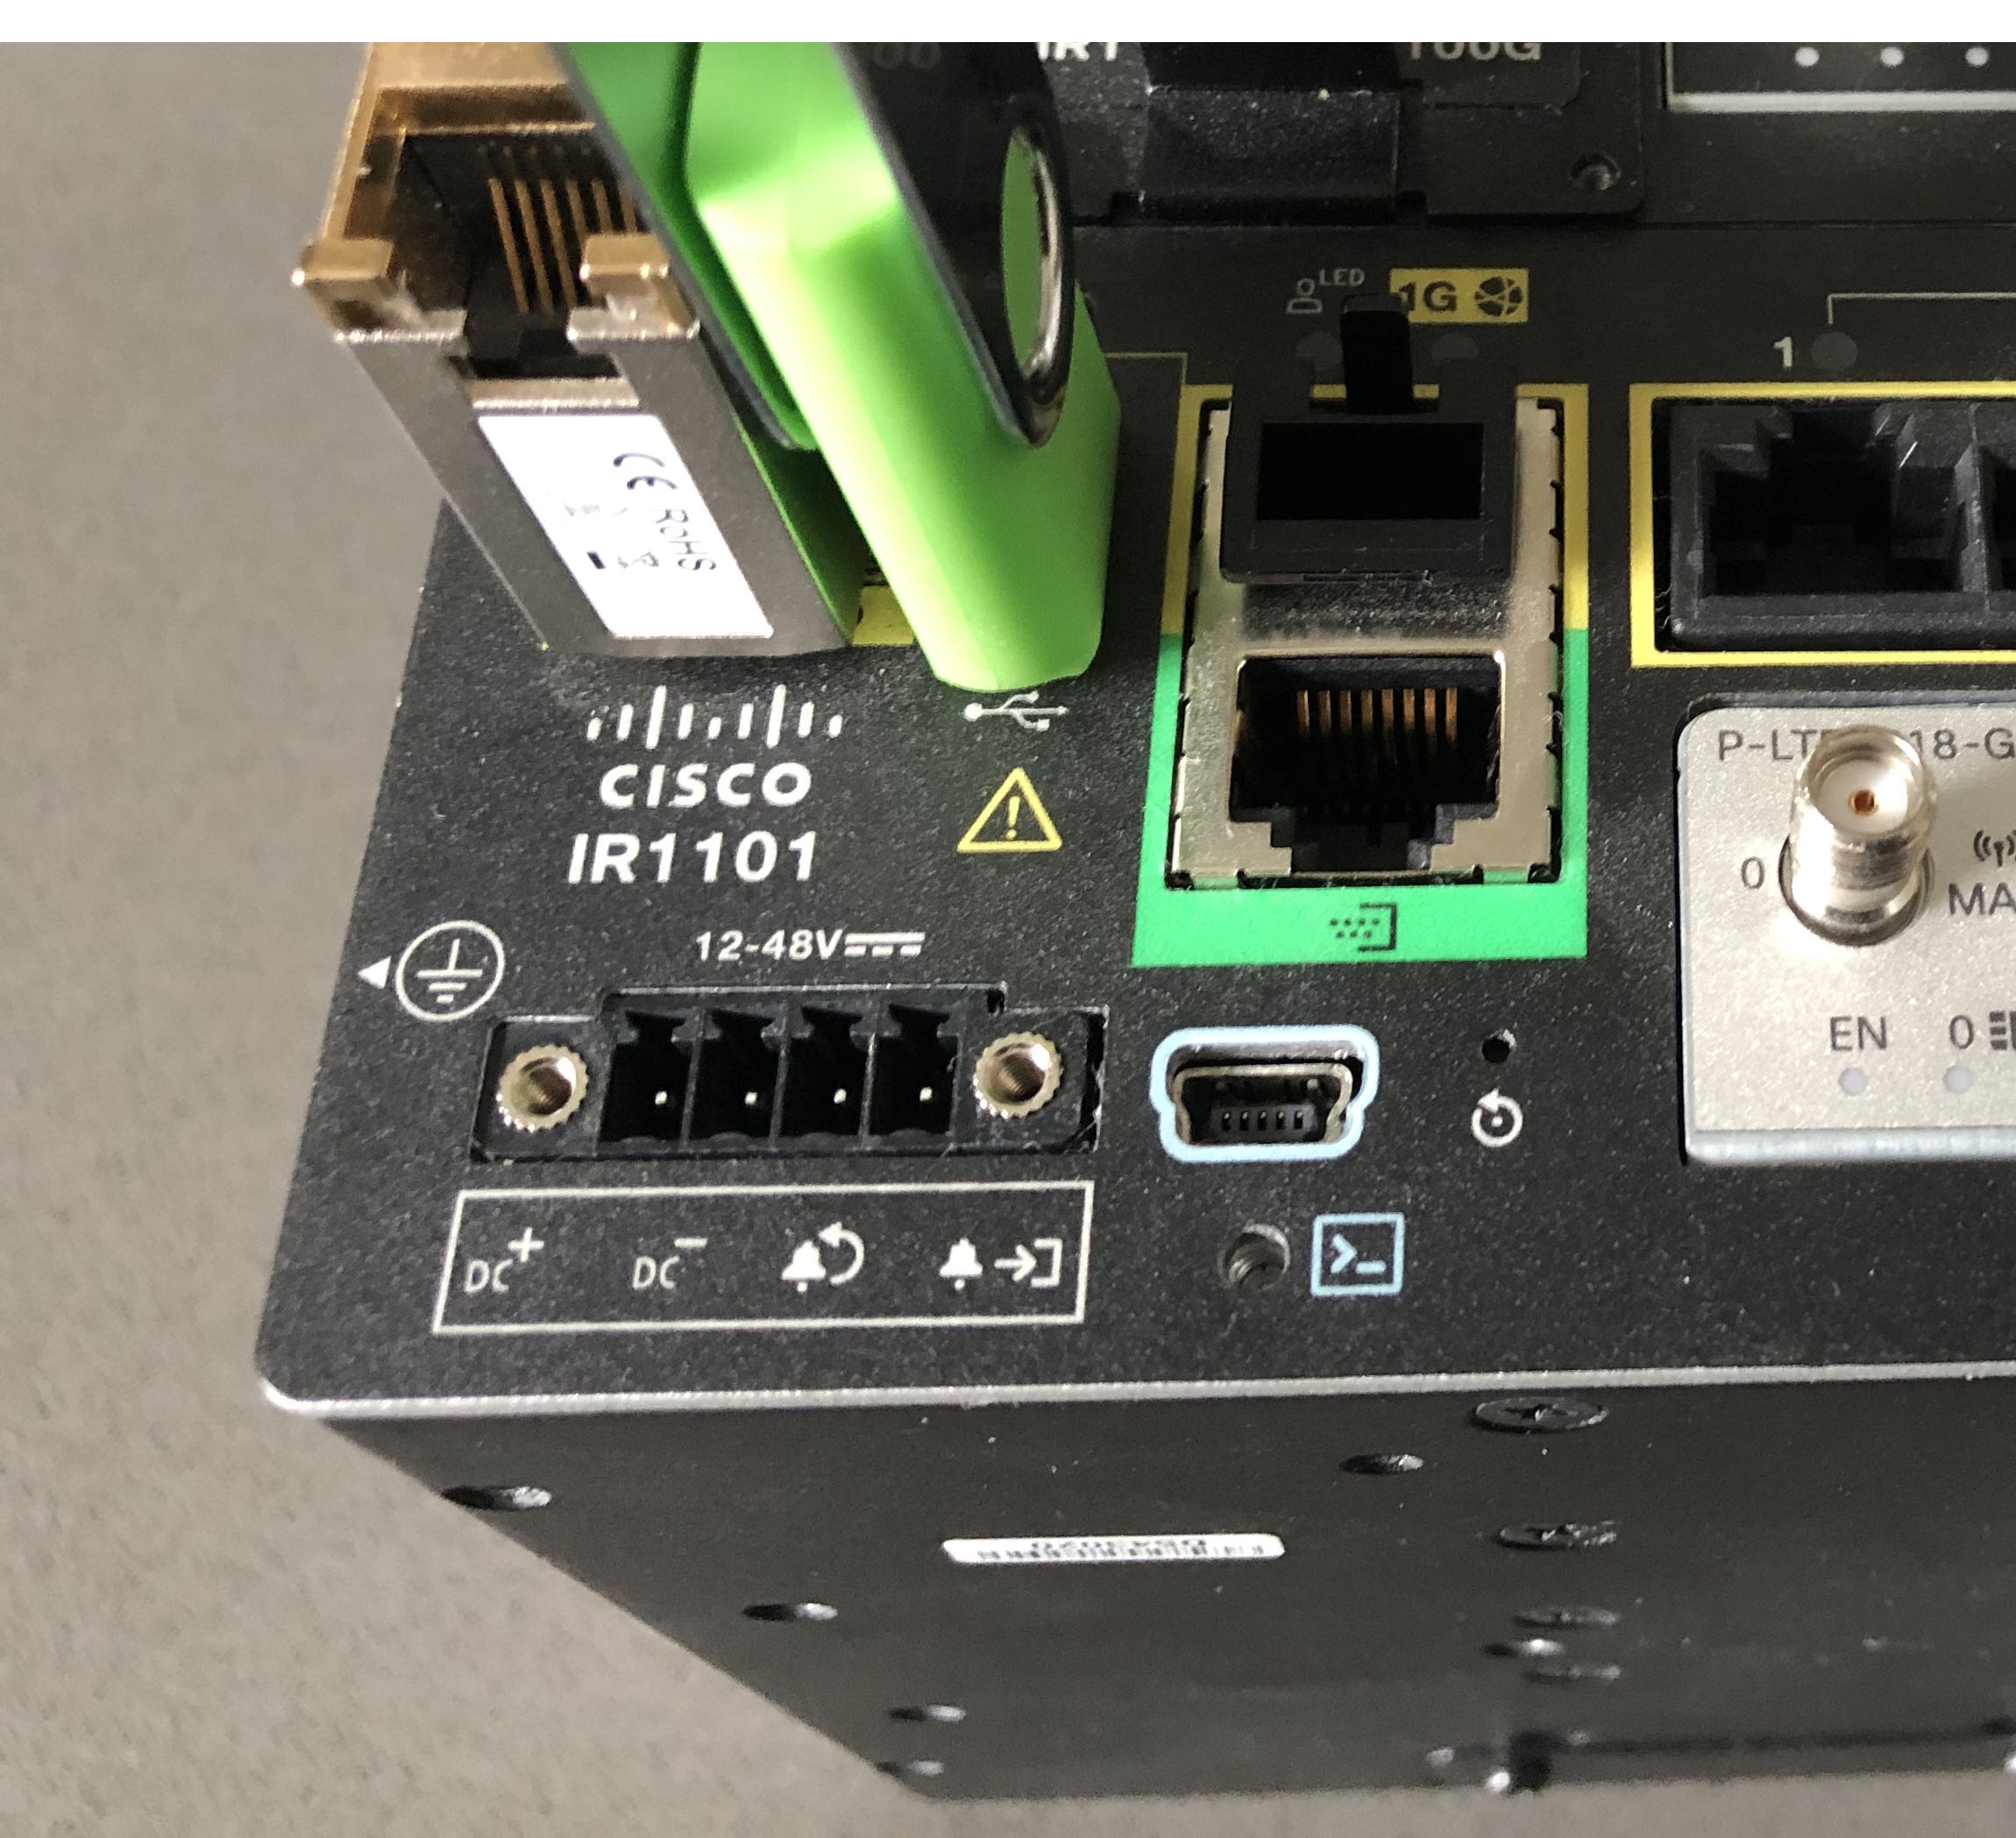 Cisco Catalyst IR1101 Rugged Series Router Hardware Installation Guide  Product Overview [Analytics and Automation Software] Cisco